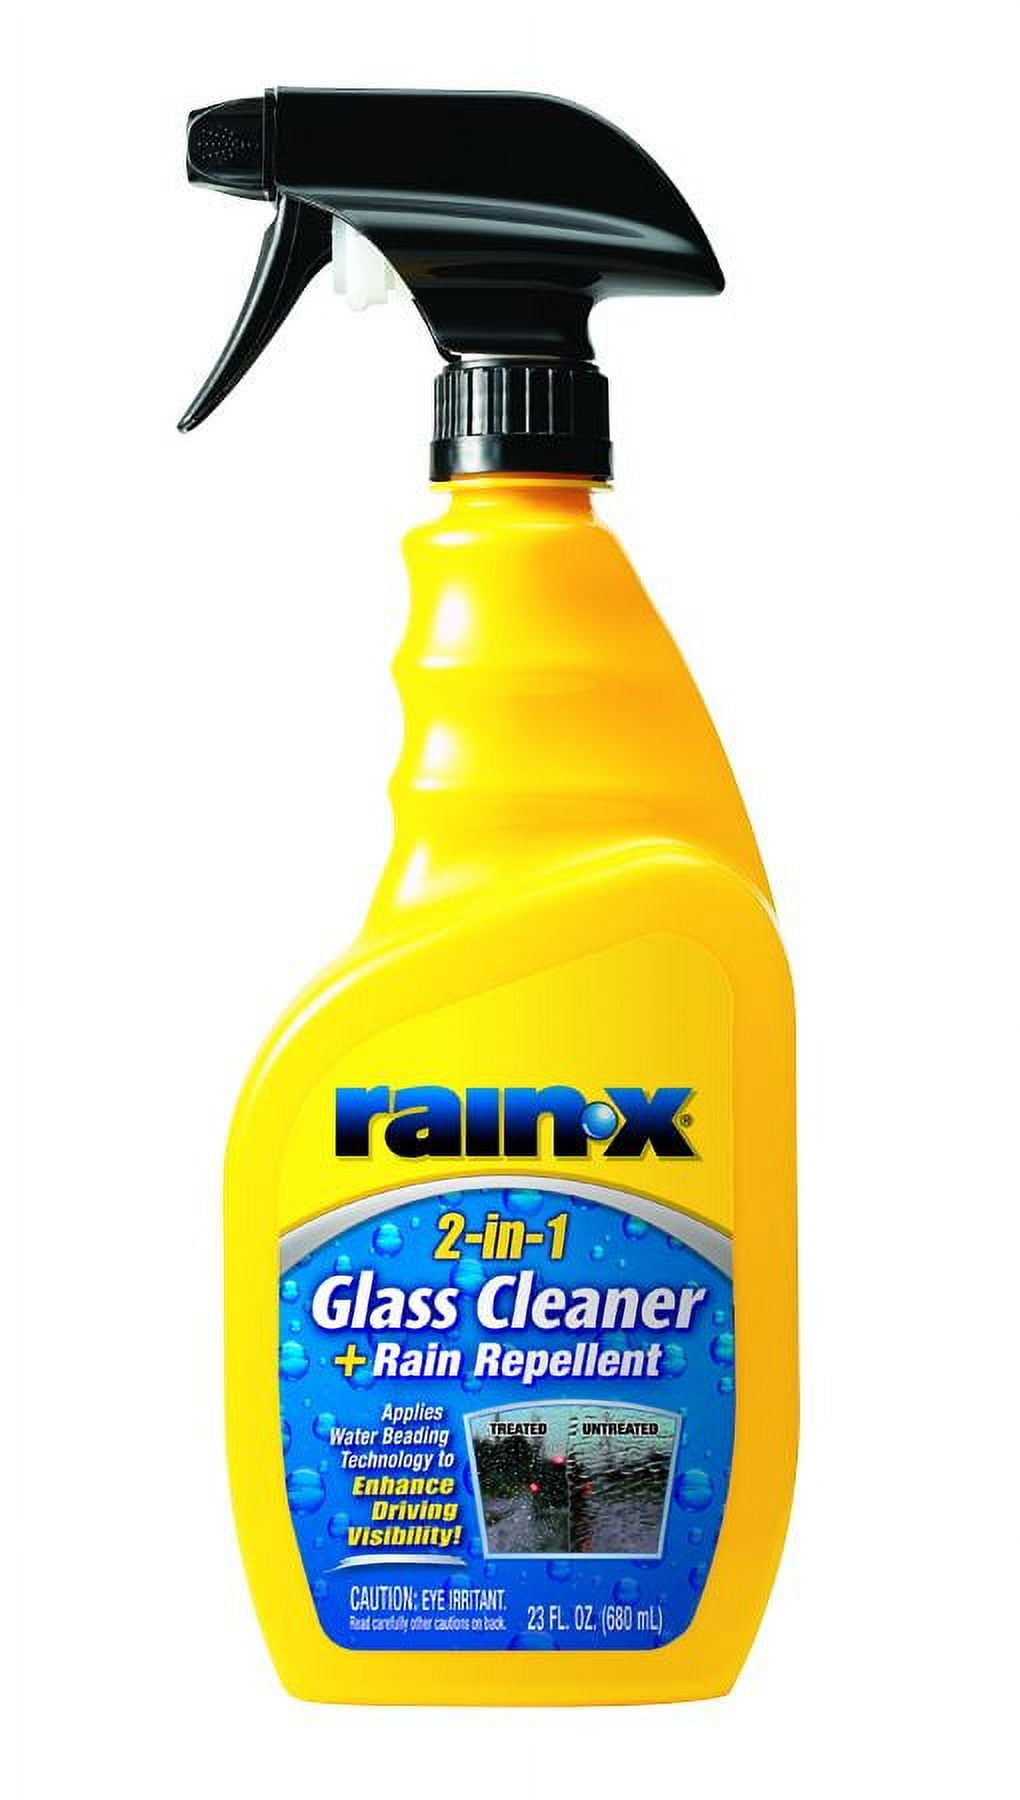 Rain-X on Instagram: Keep your home clean during the holidays with Rain-X®.  Find our Xtreme Clean Shower Door Cleaner AND Shower Door Water Repellent  at .com! #RainX #RepelEveryElement #OutsmartTheElements #Cleaning  #CleaningHacks